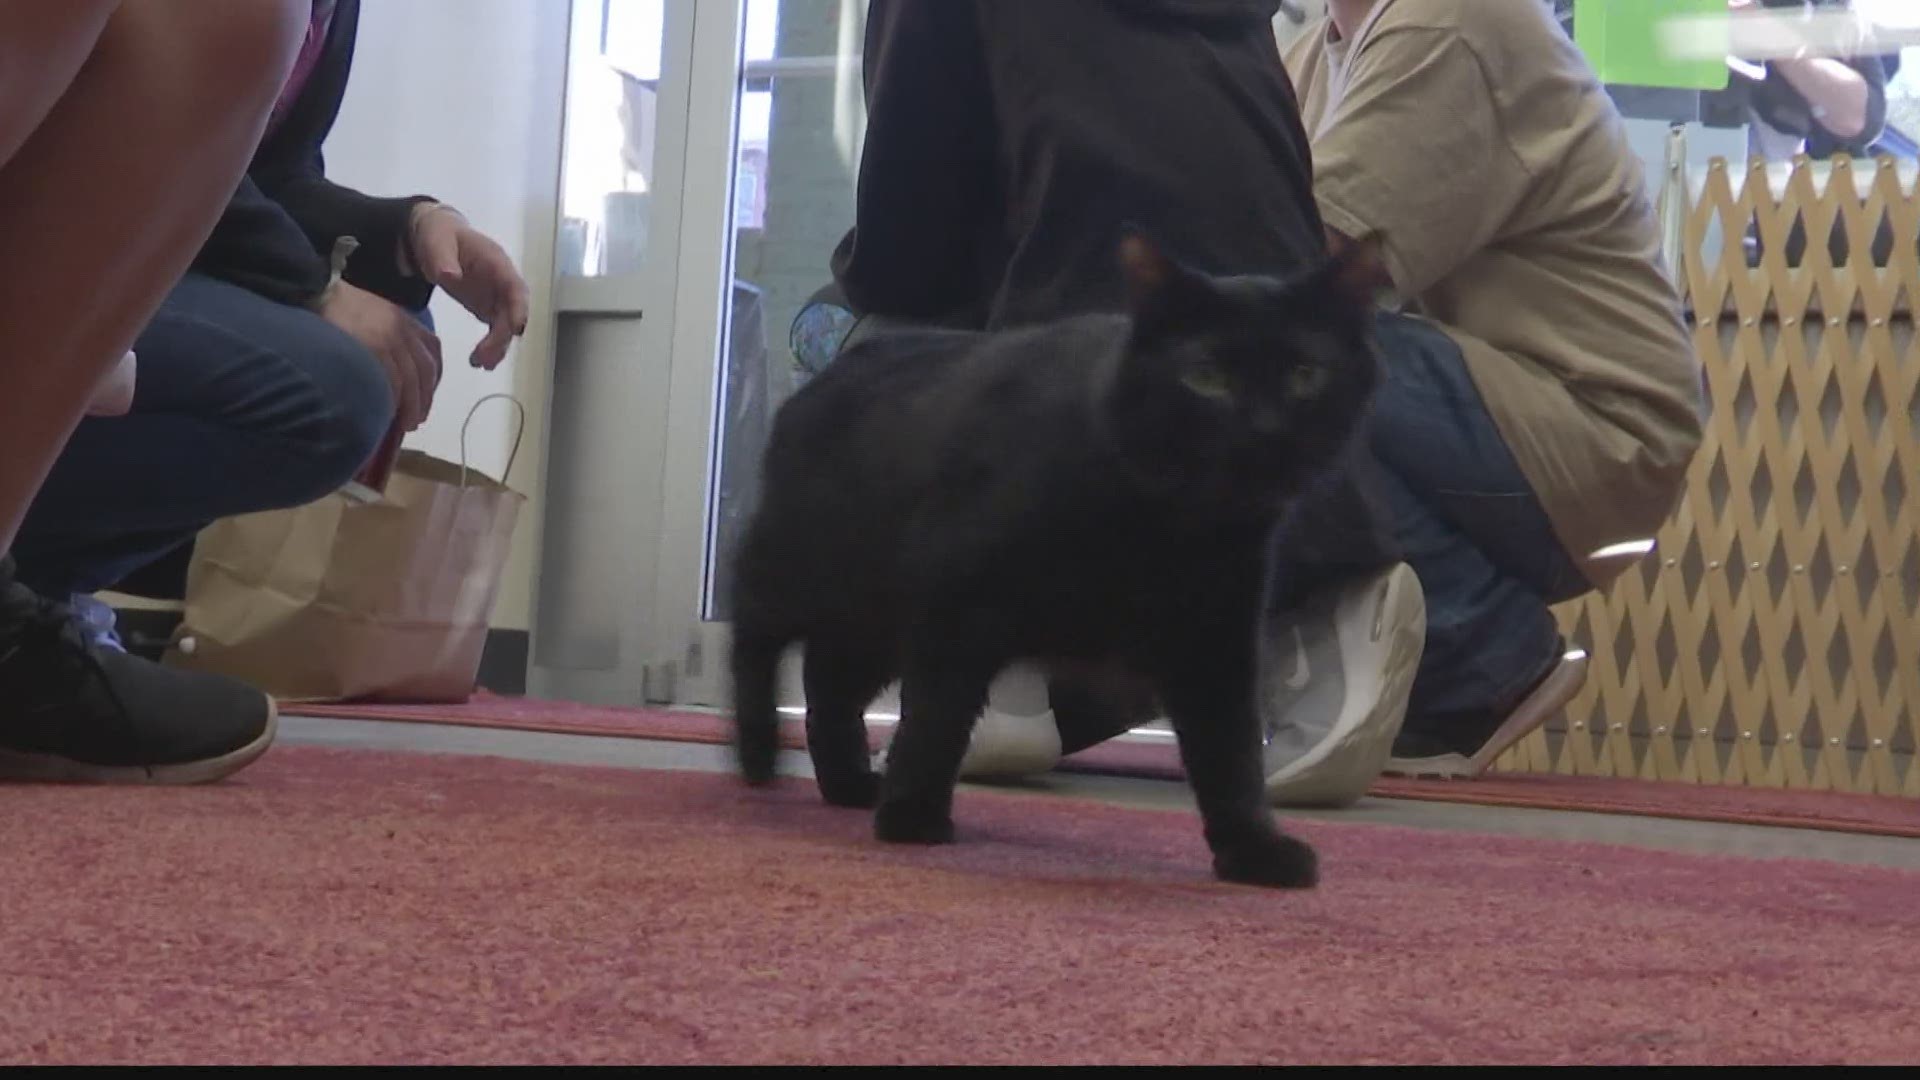 Cattyshack is a non-profit cat lounge. They had their open house tonight at their location in Lowe Mill.